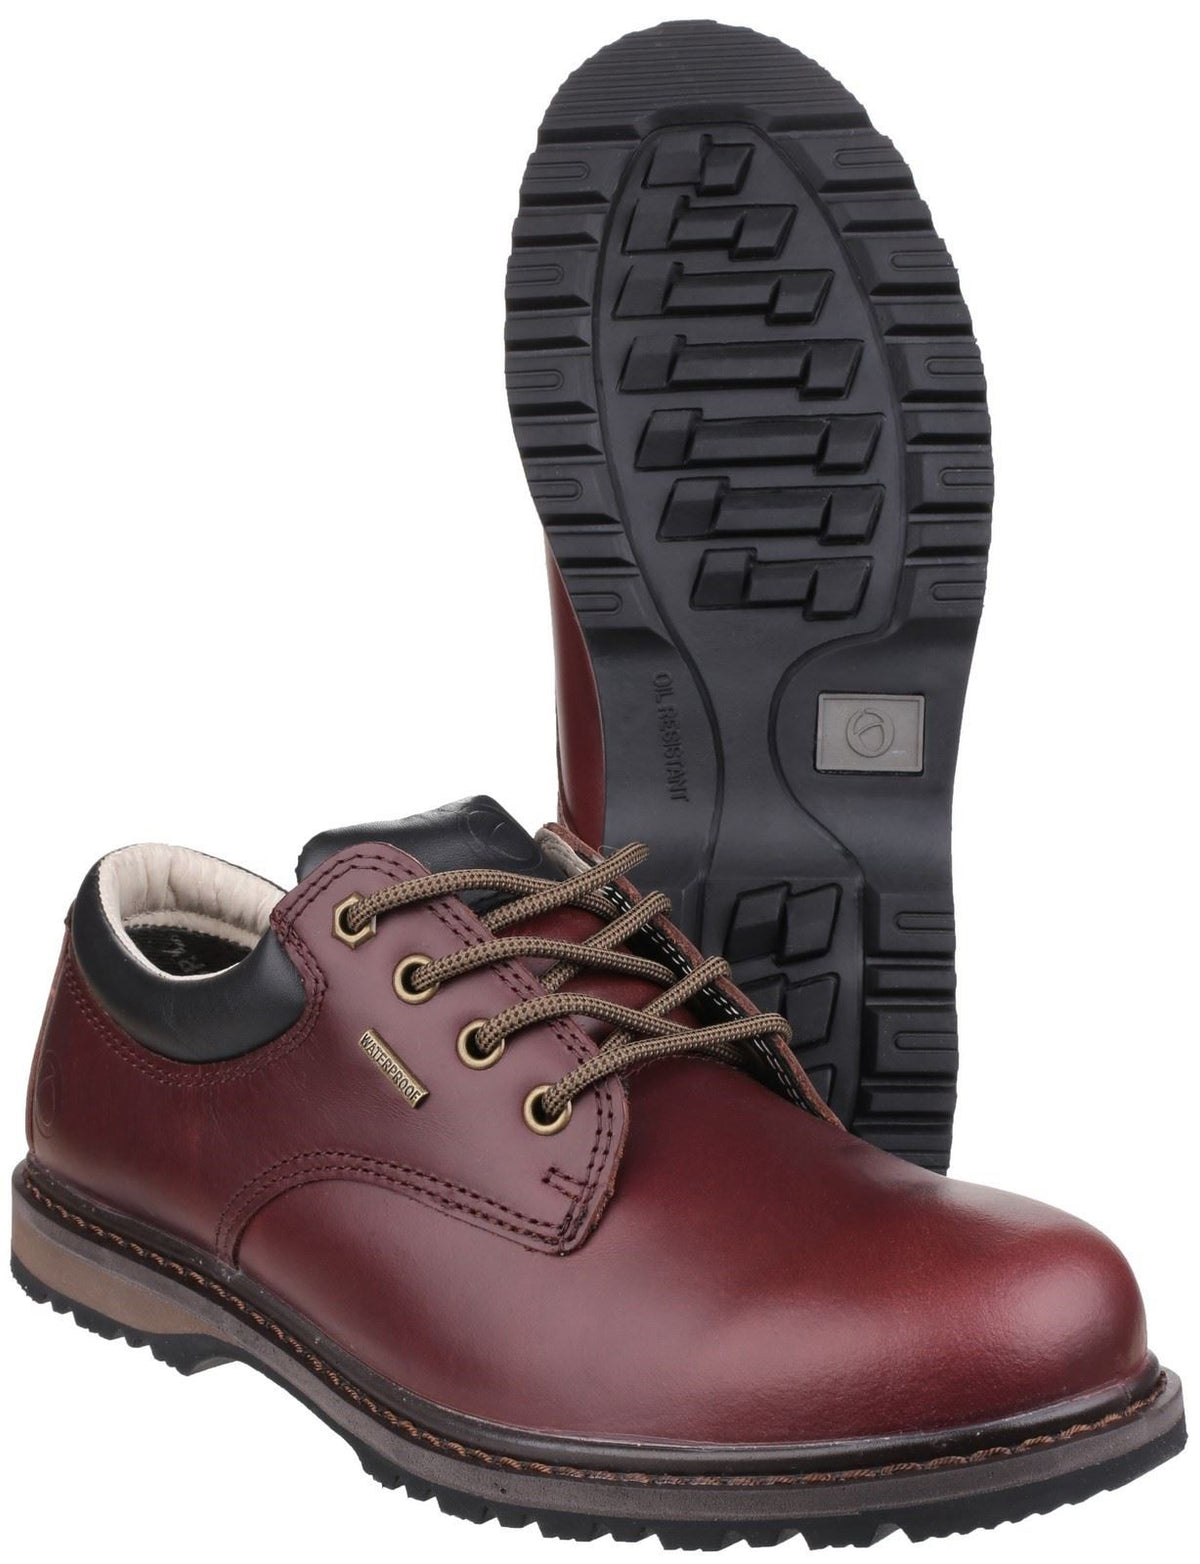 Cotswold Stonesfield Hiking Shoes